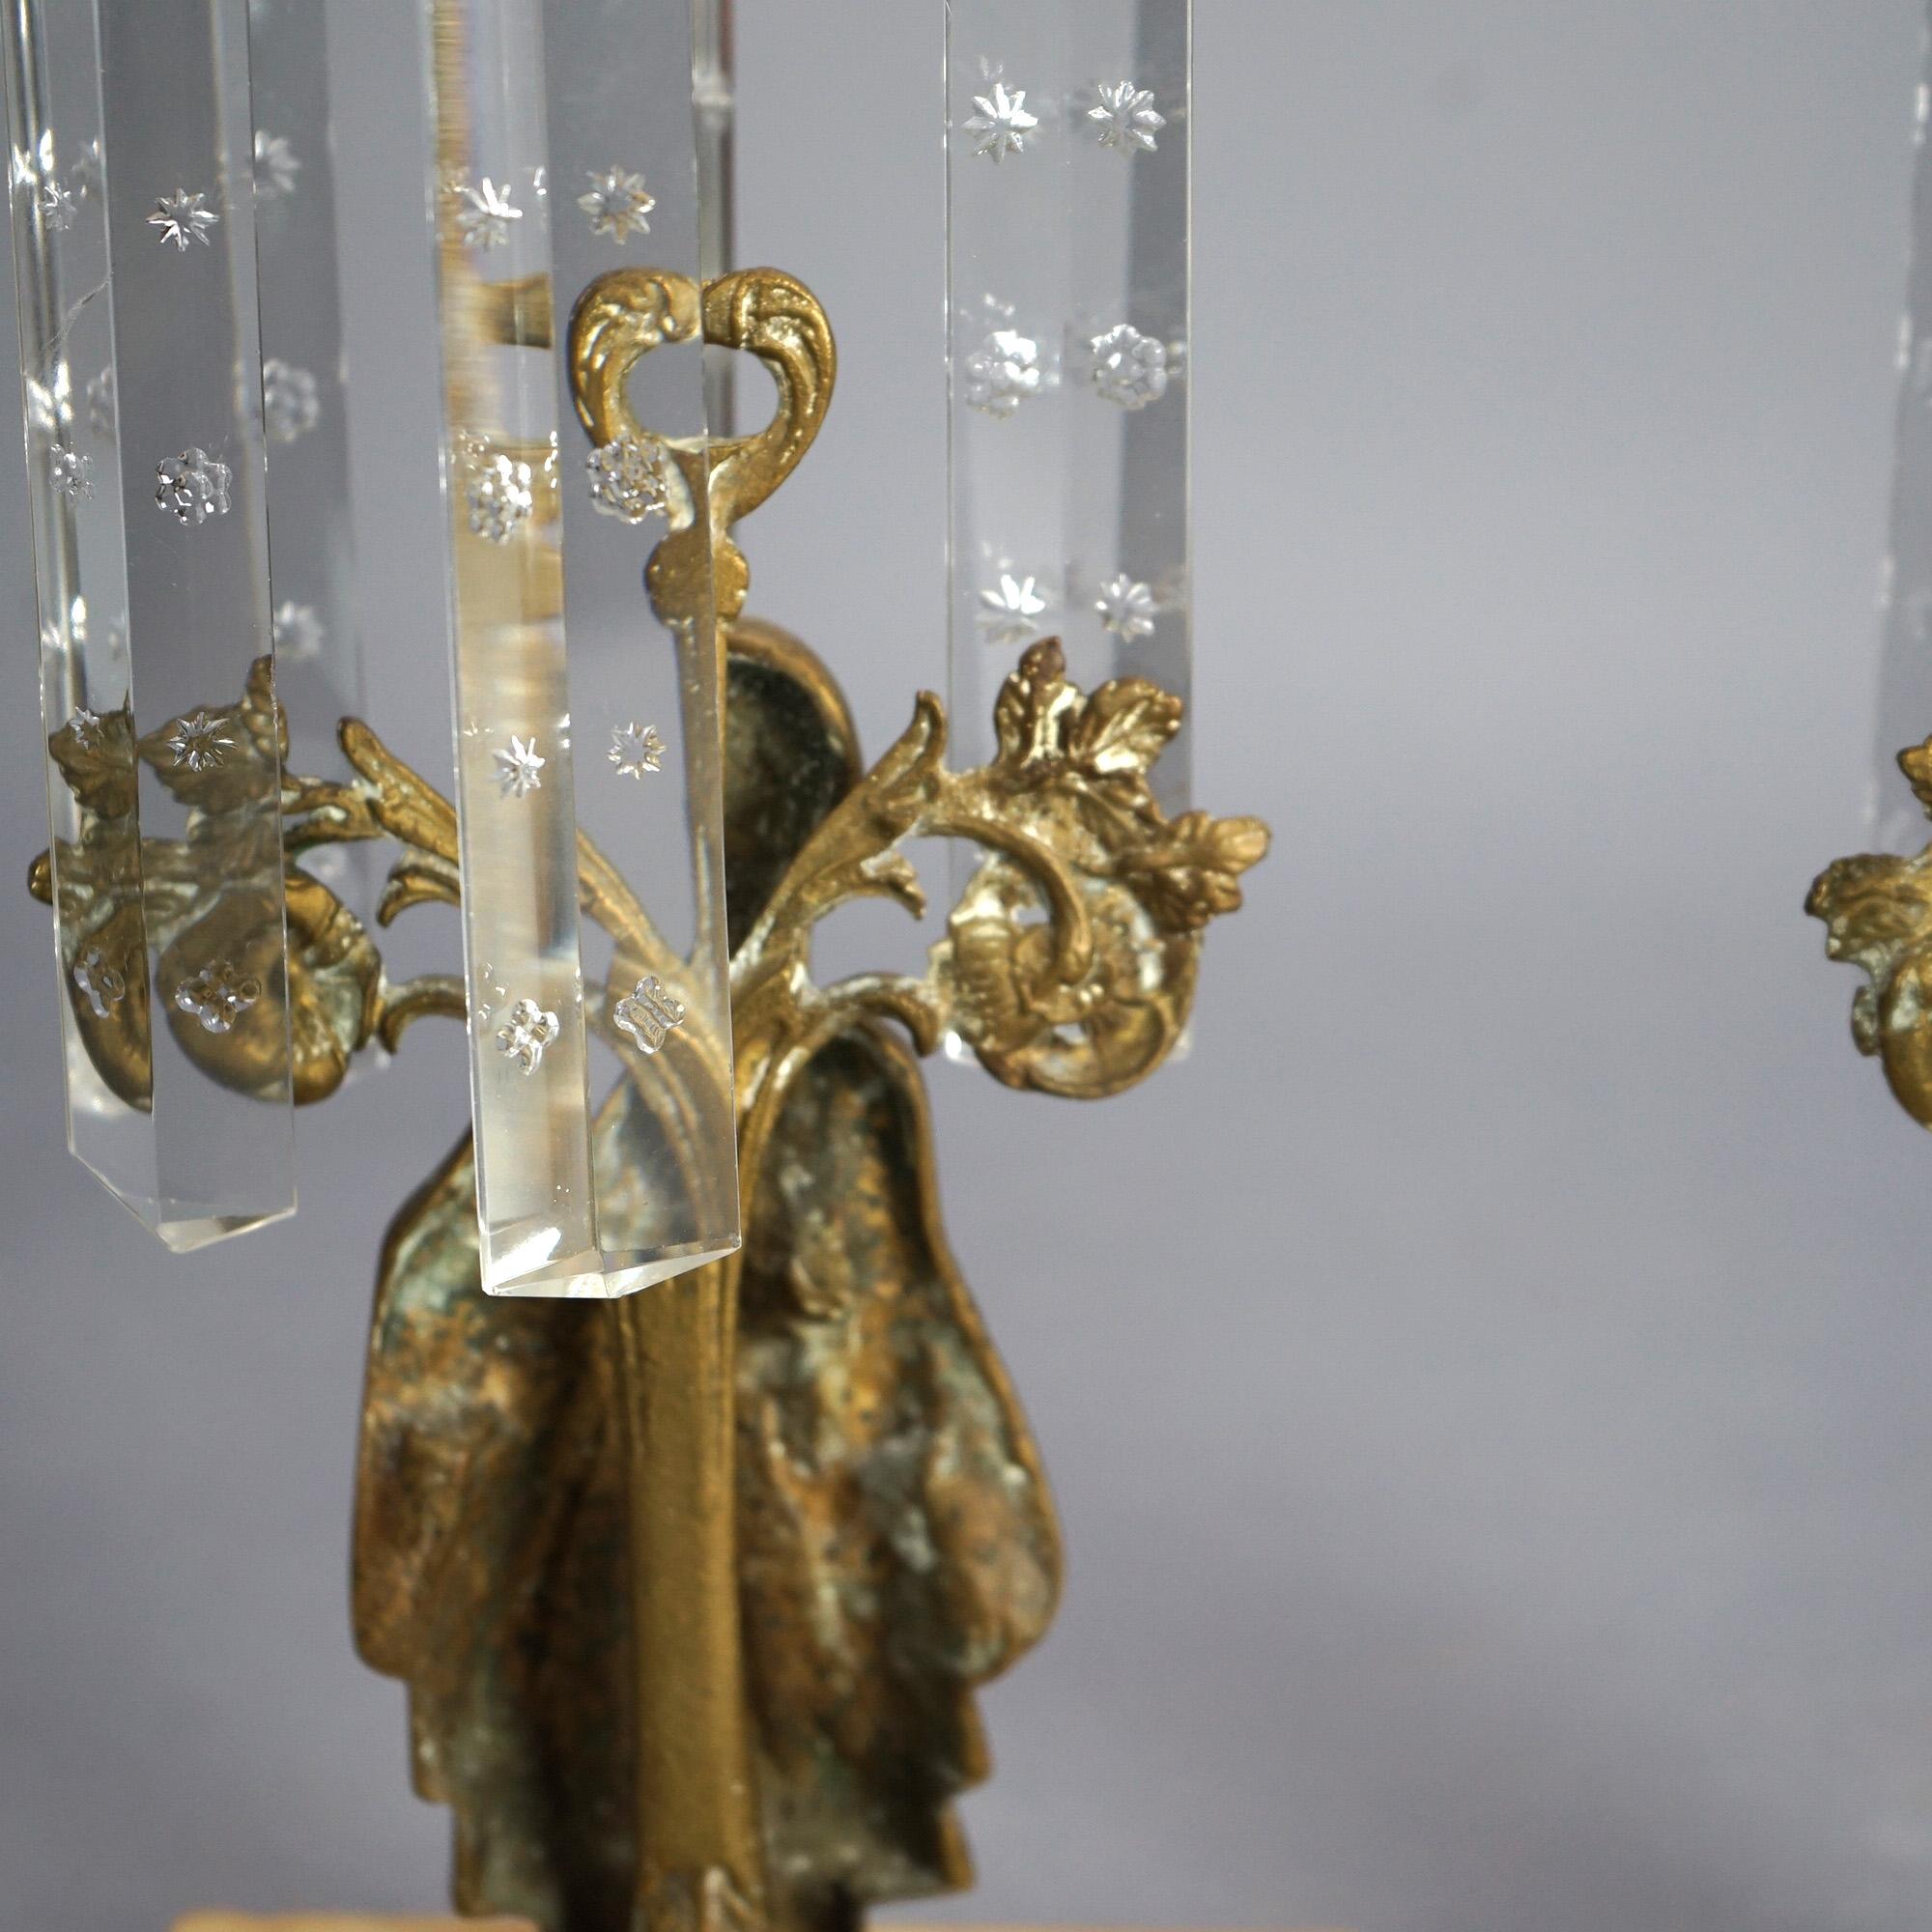 Antique Pair Figural Girandole Sultana Design Oil Lamps with Crystals C1880 For Sale 4